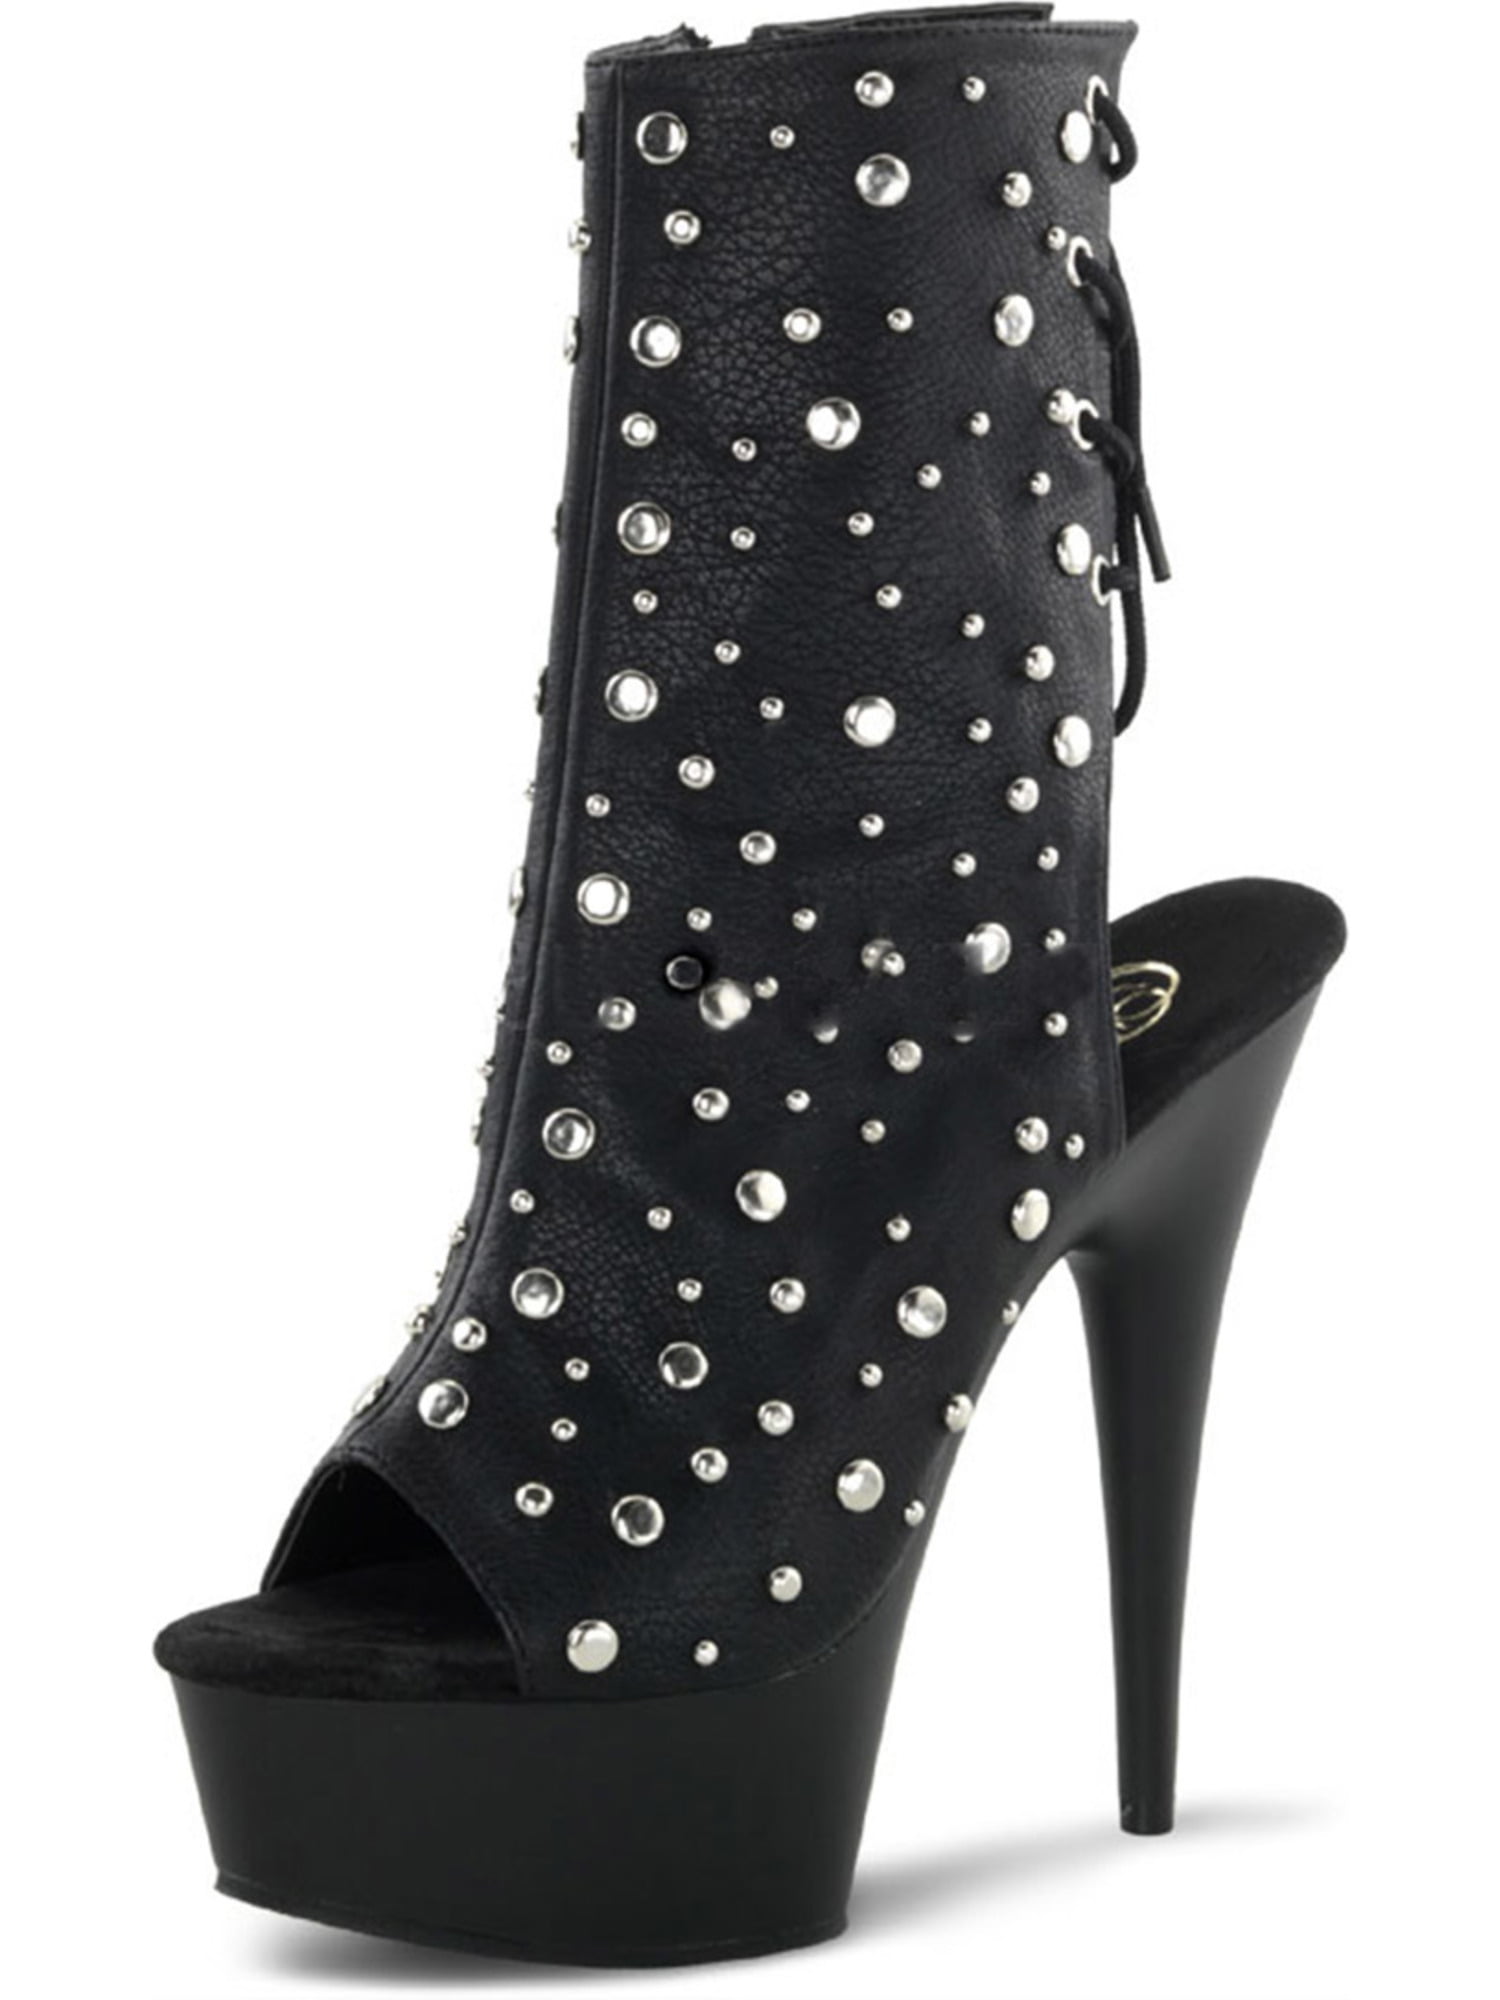 Black Studded Ankle Boots with Lace Up 